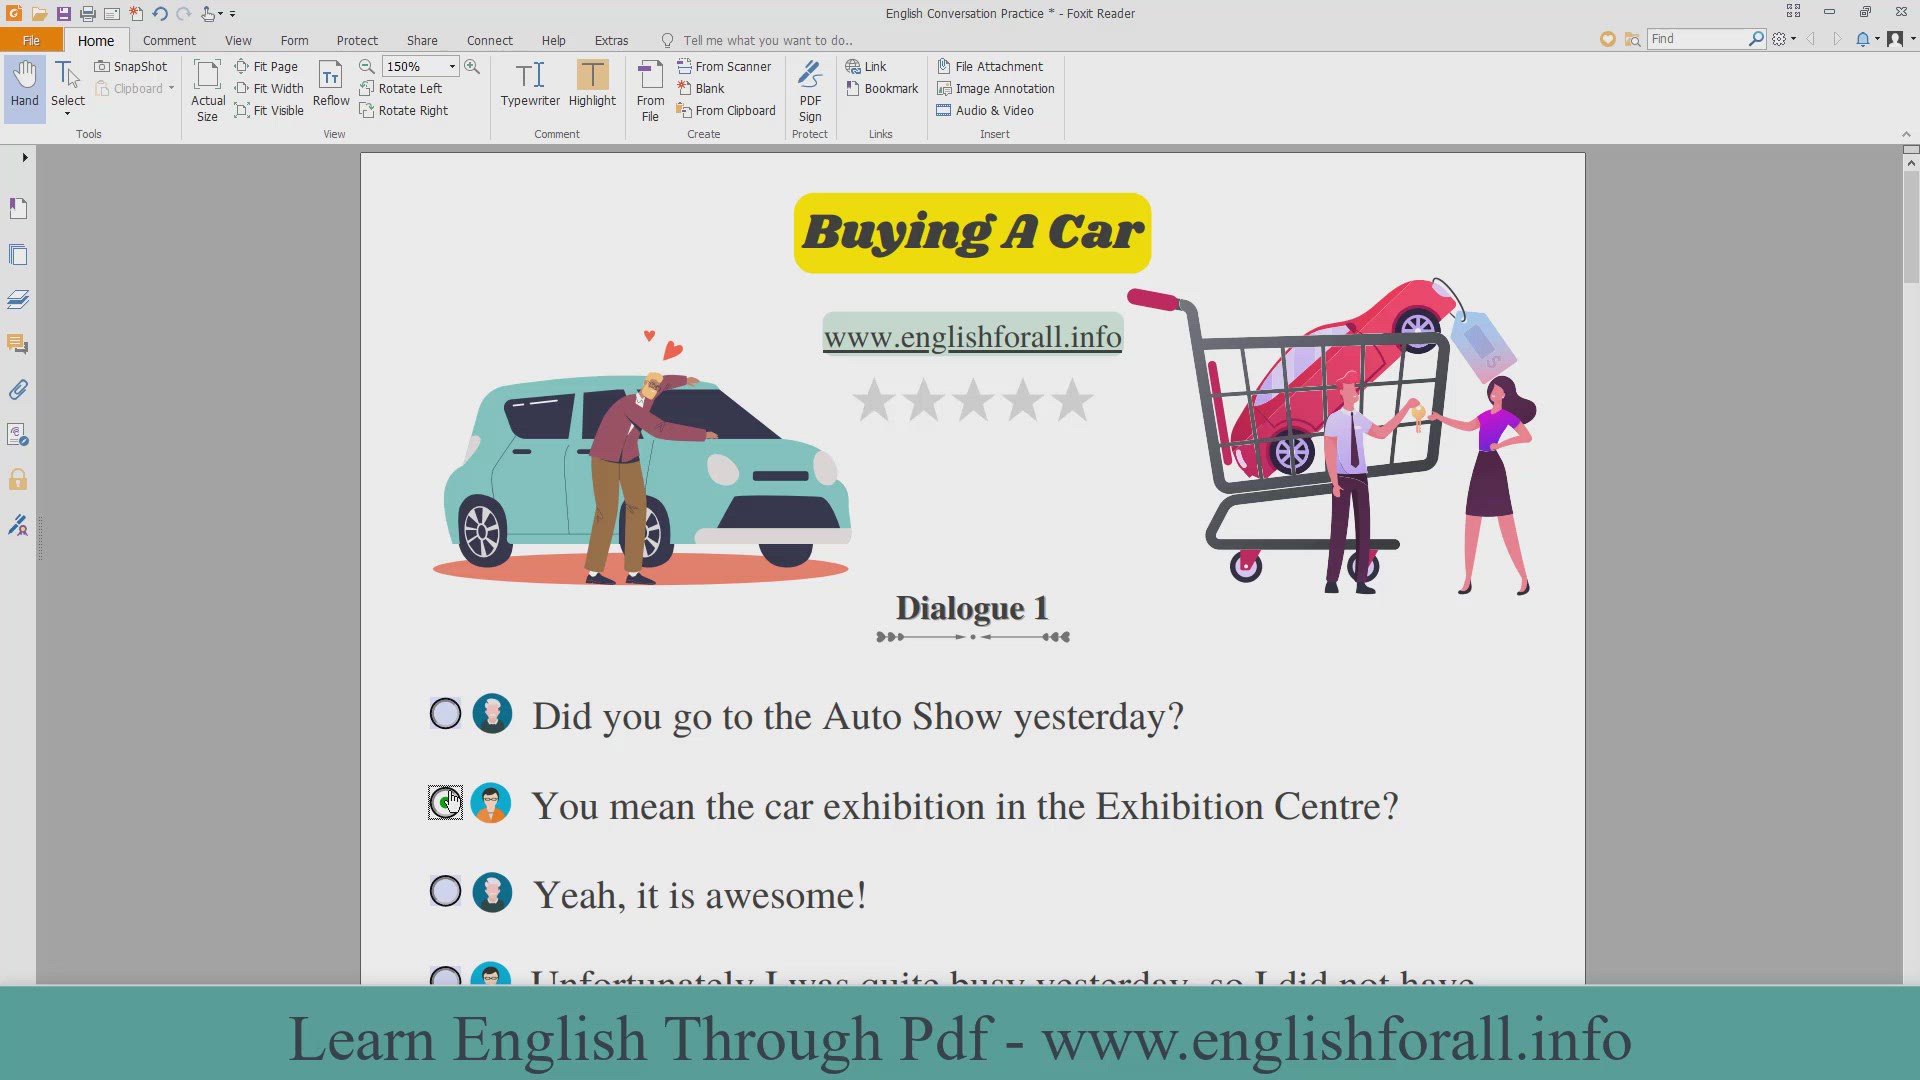 'Video thumbnail for English Conversation Practice - Buying A Car'